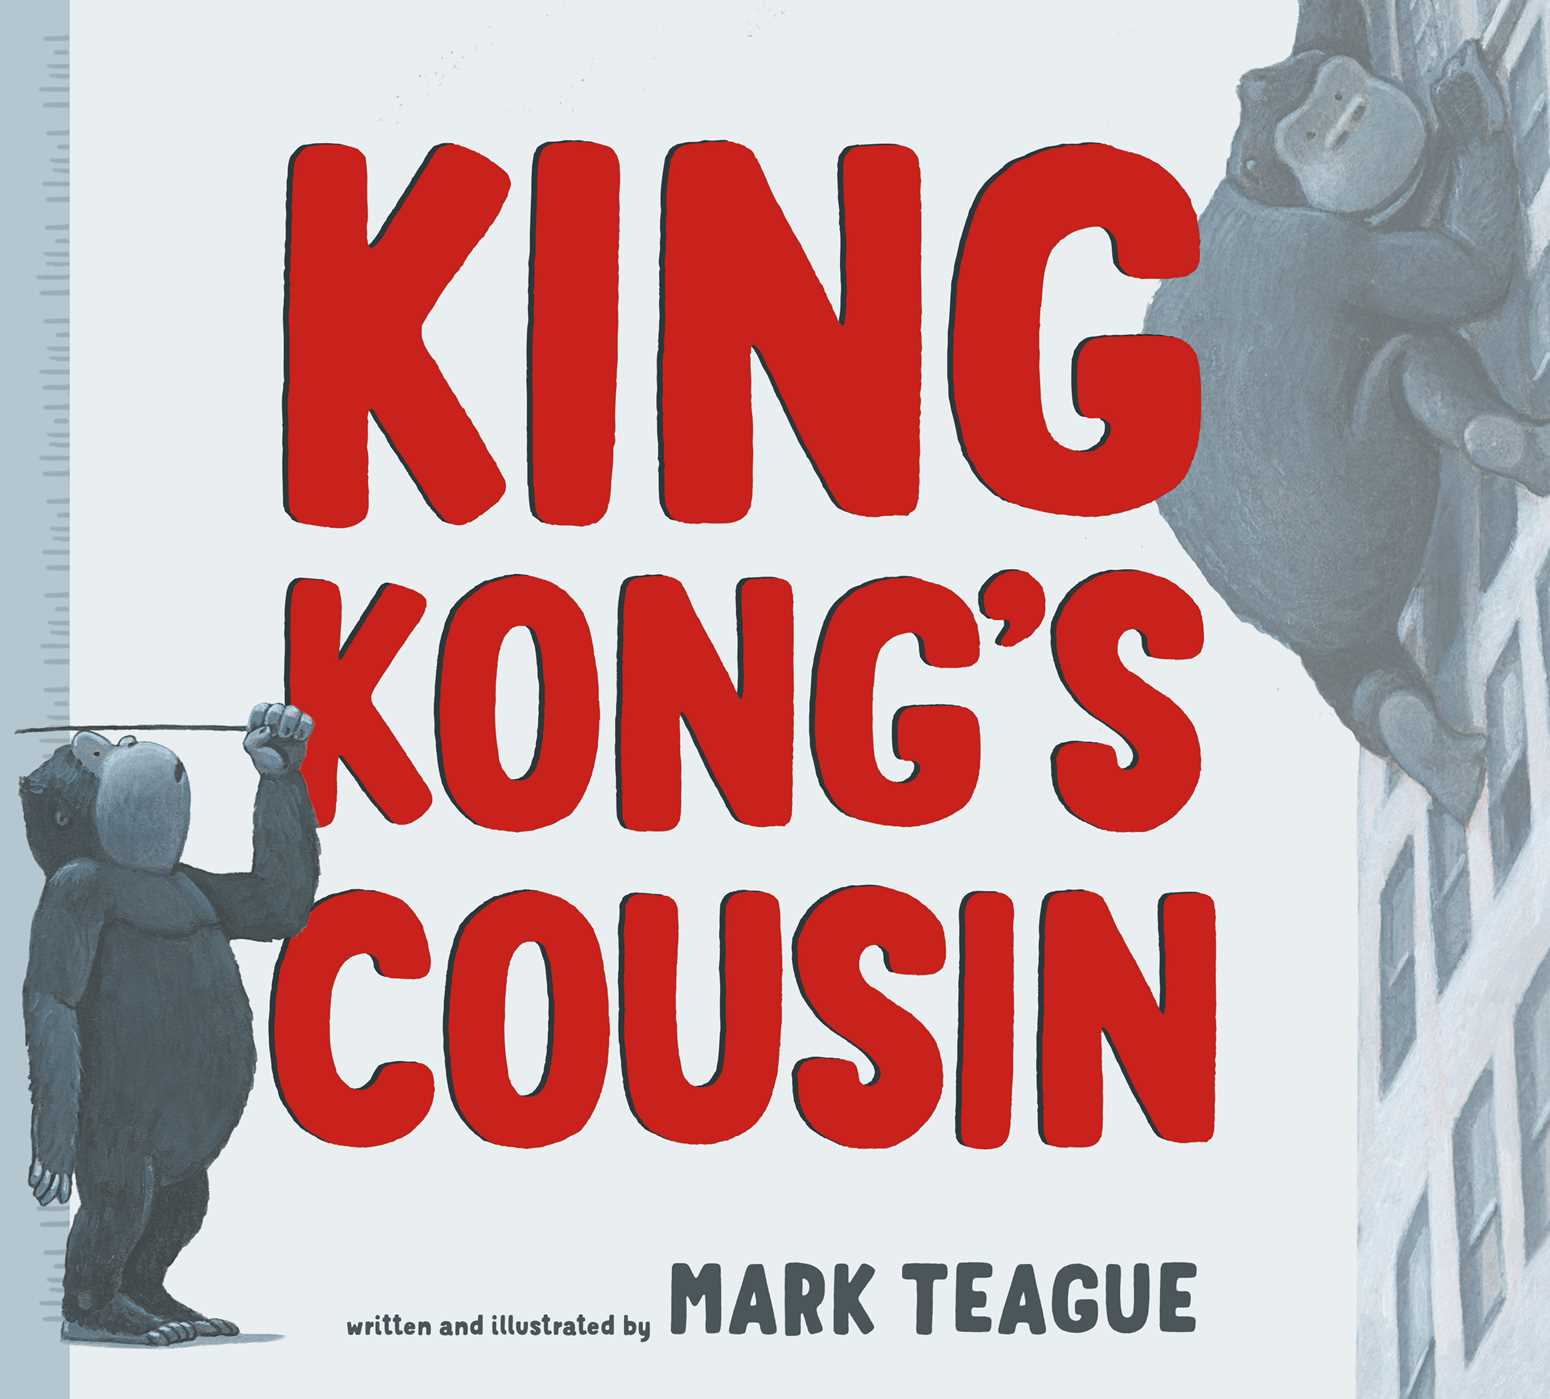 Image for "King Kong's Cousin"